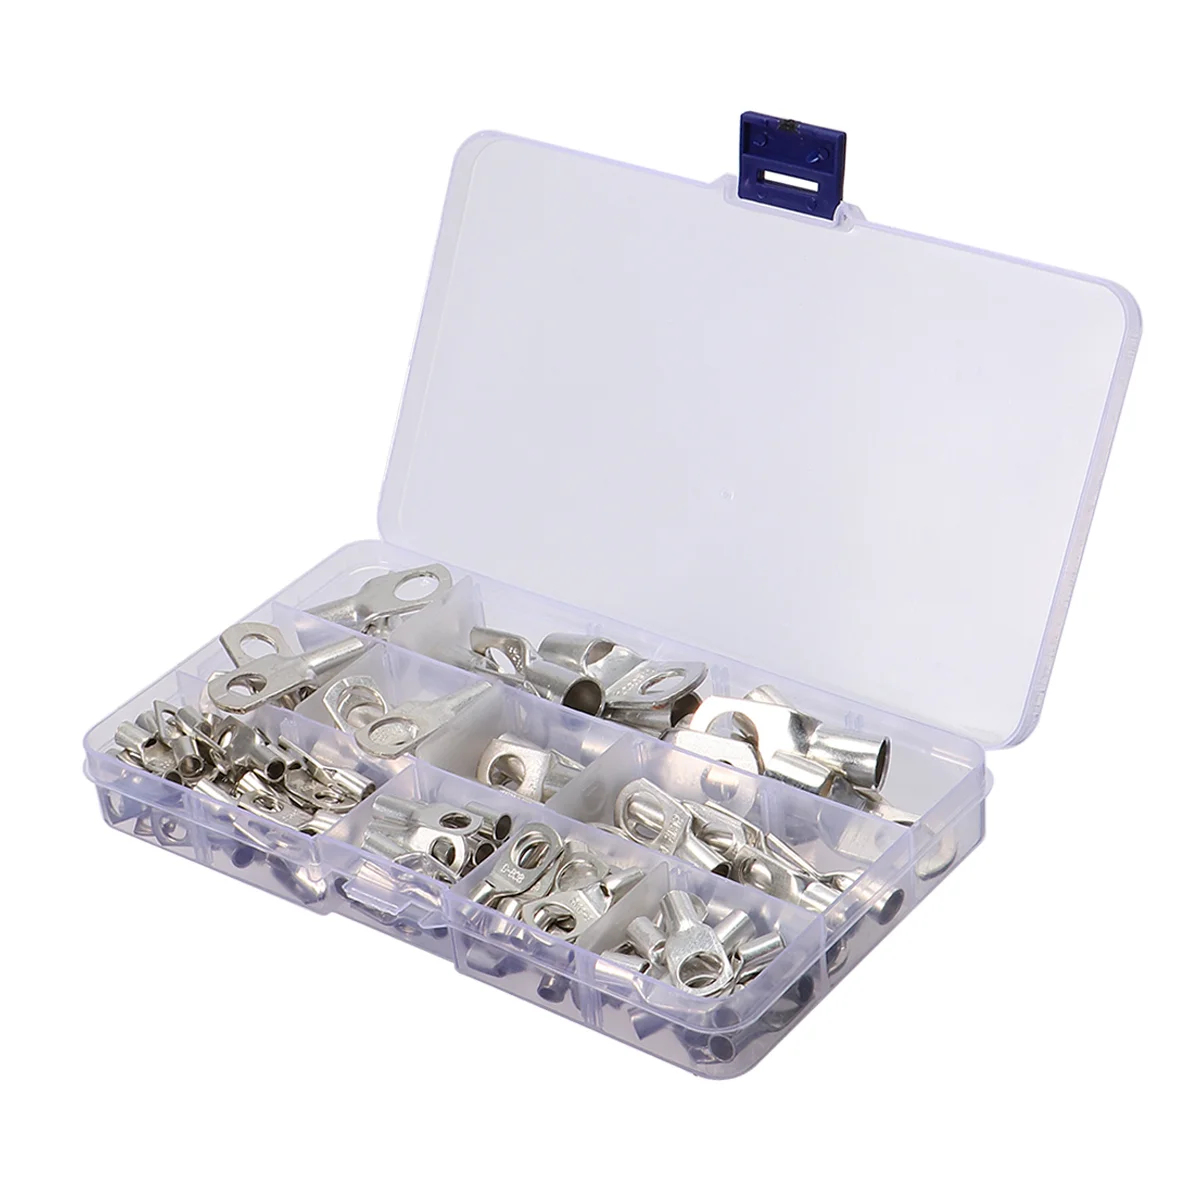 

120pcs Connector Heavy Duty Wire Lugs Cable Closed Ends Bare Copper Eyelets Tubular Ring Terminal Connectors (Silver)